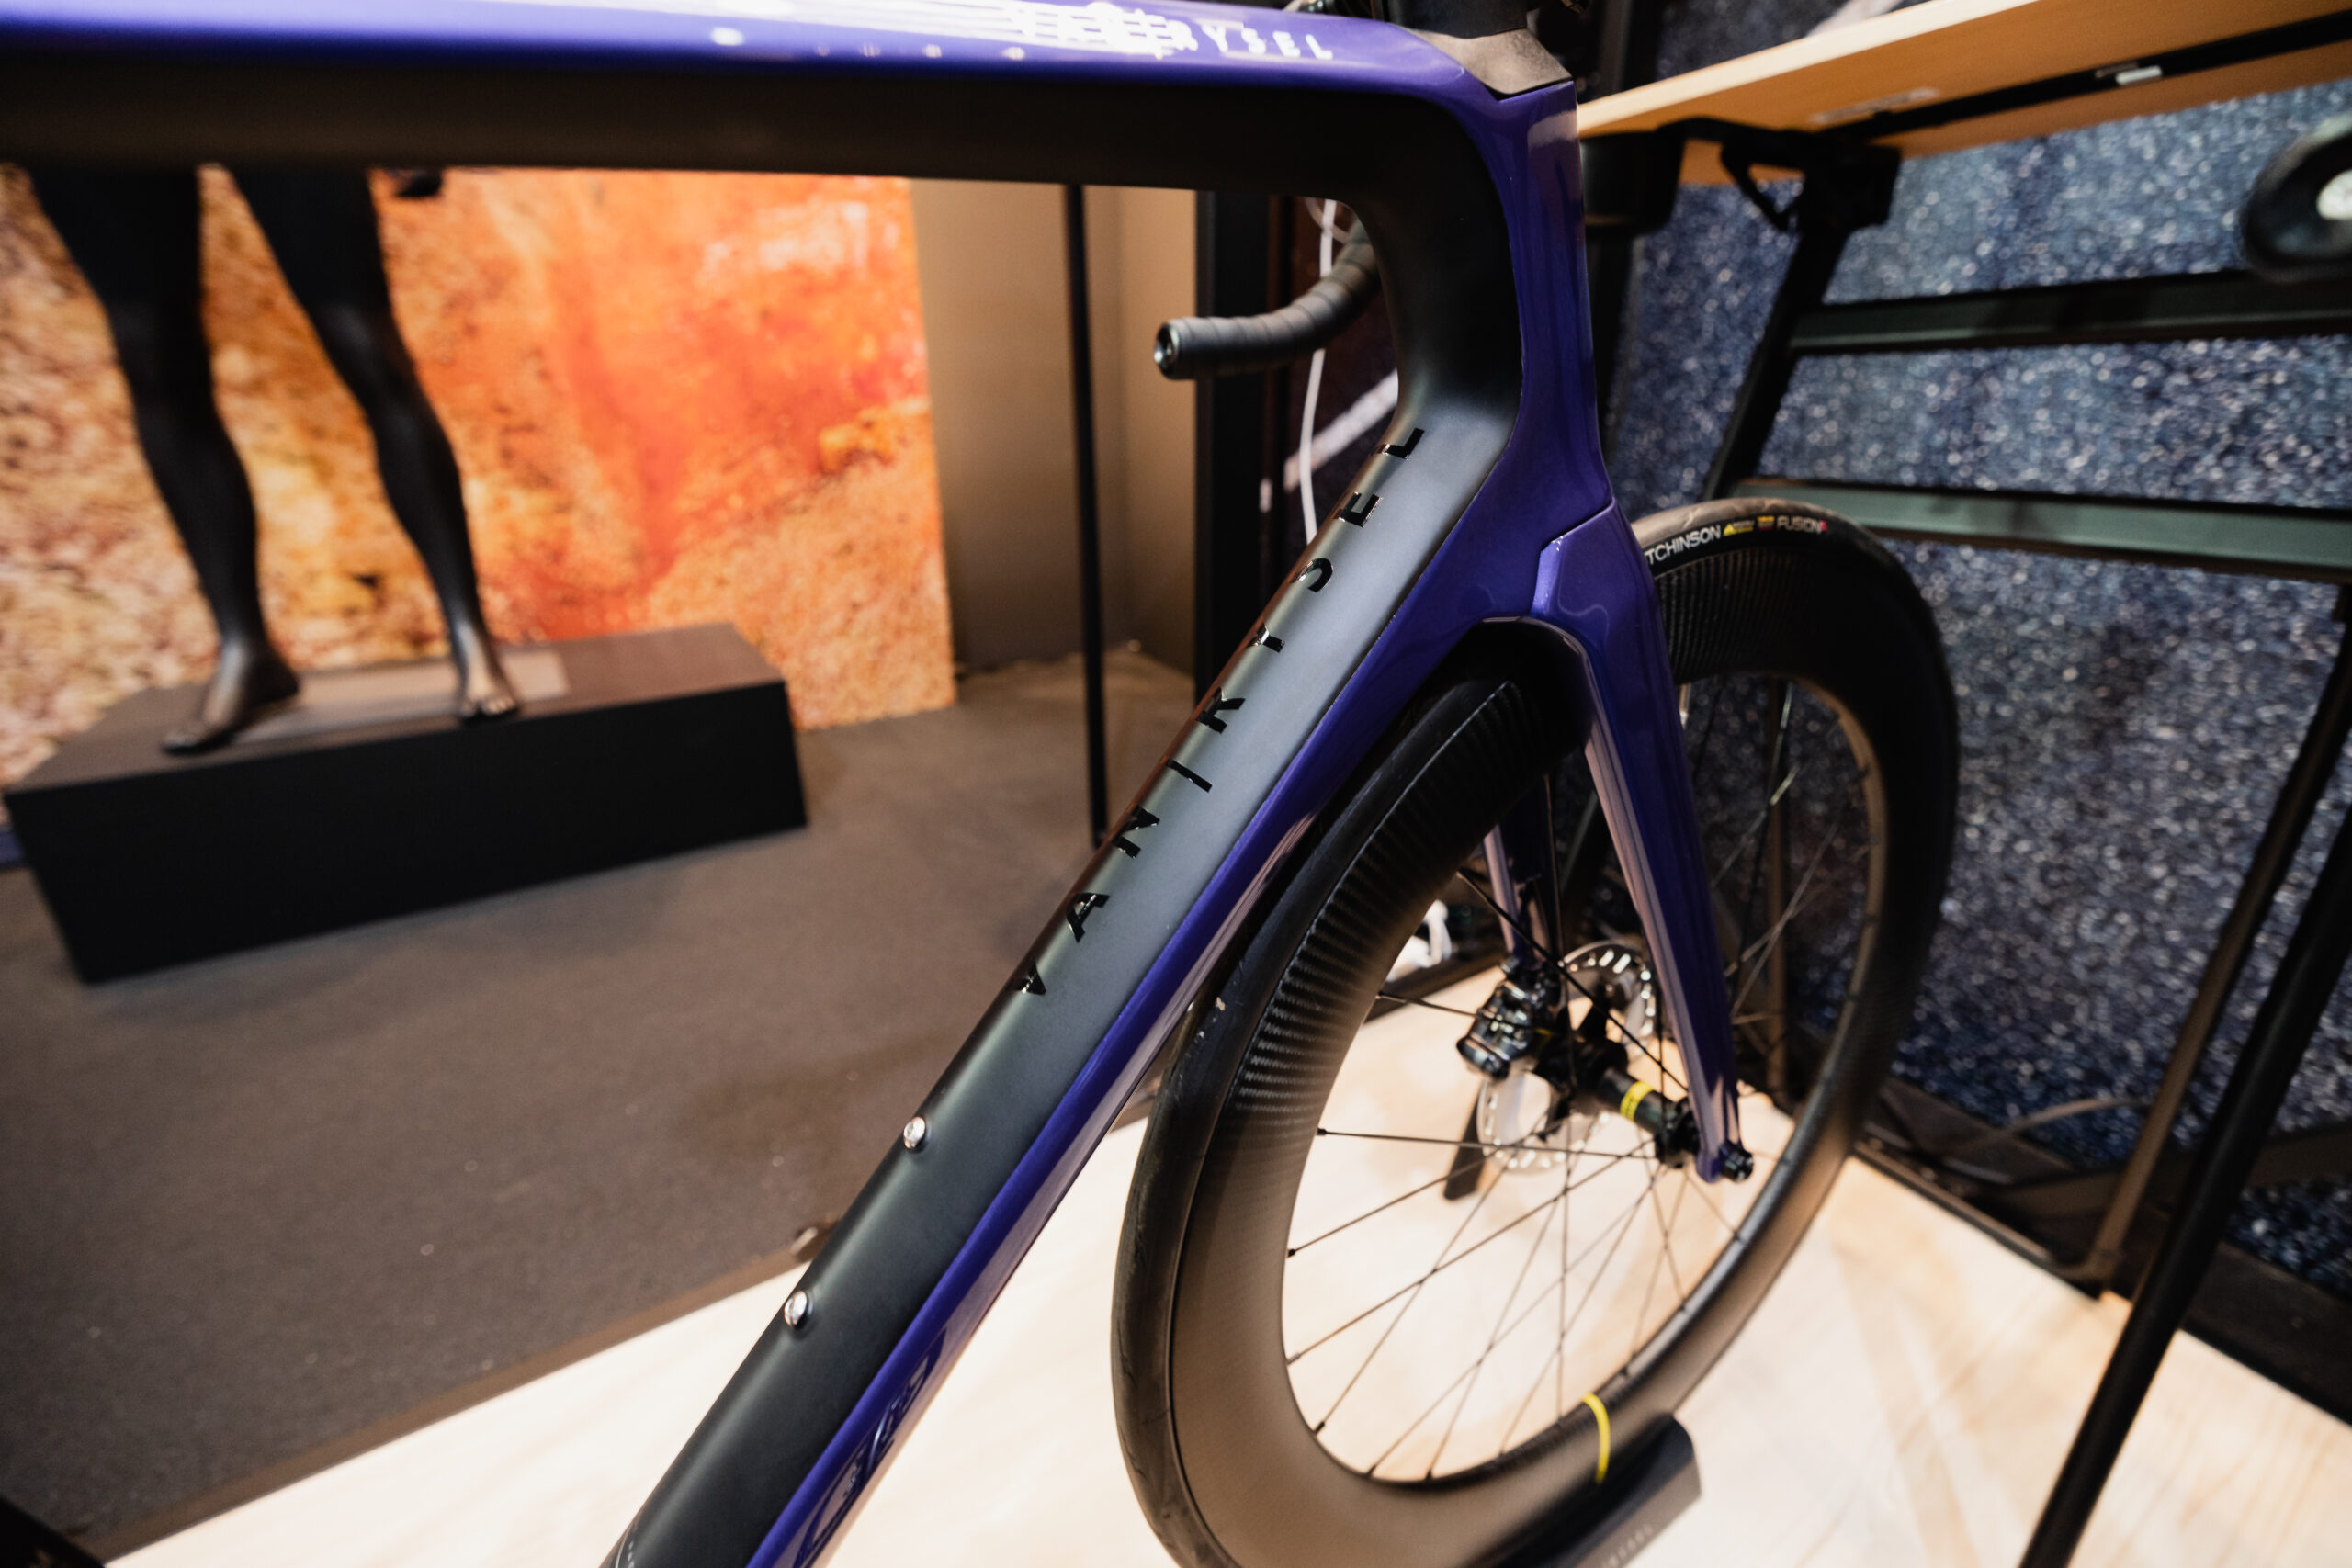 Van Rysel launches do-it-all NCR CF carbon road bike, and it looks like  great value